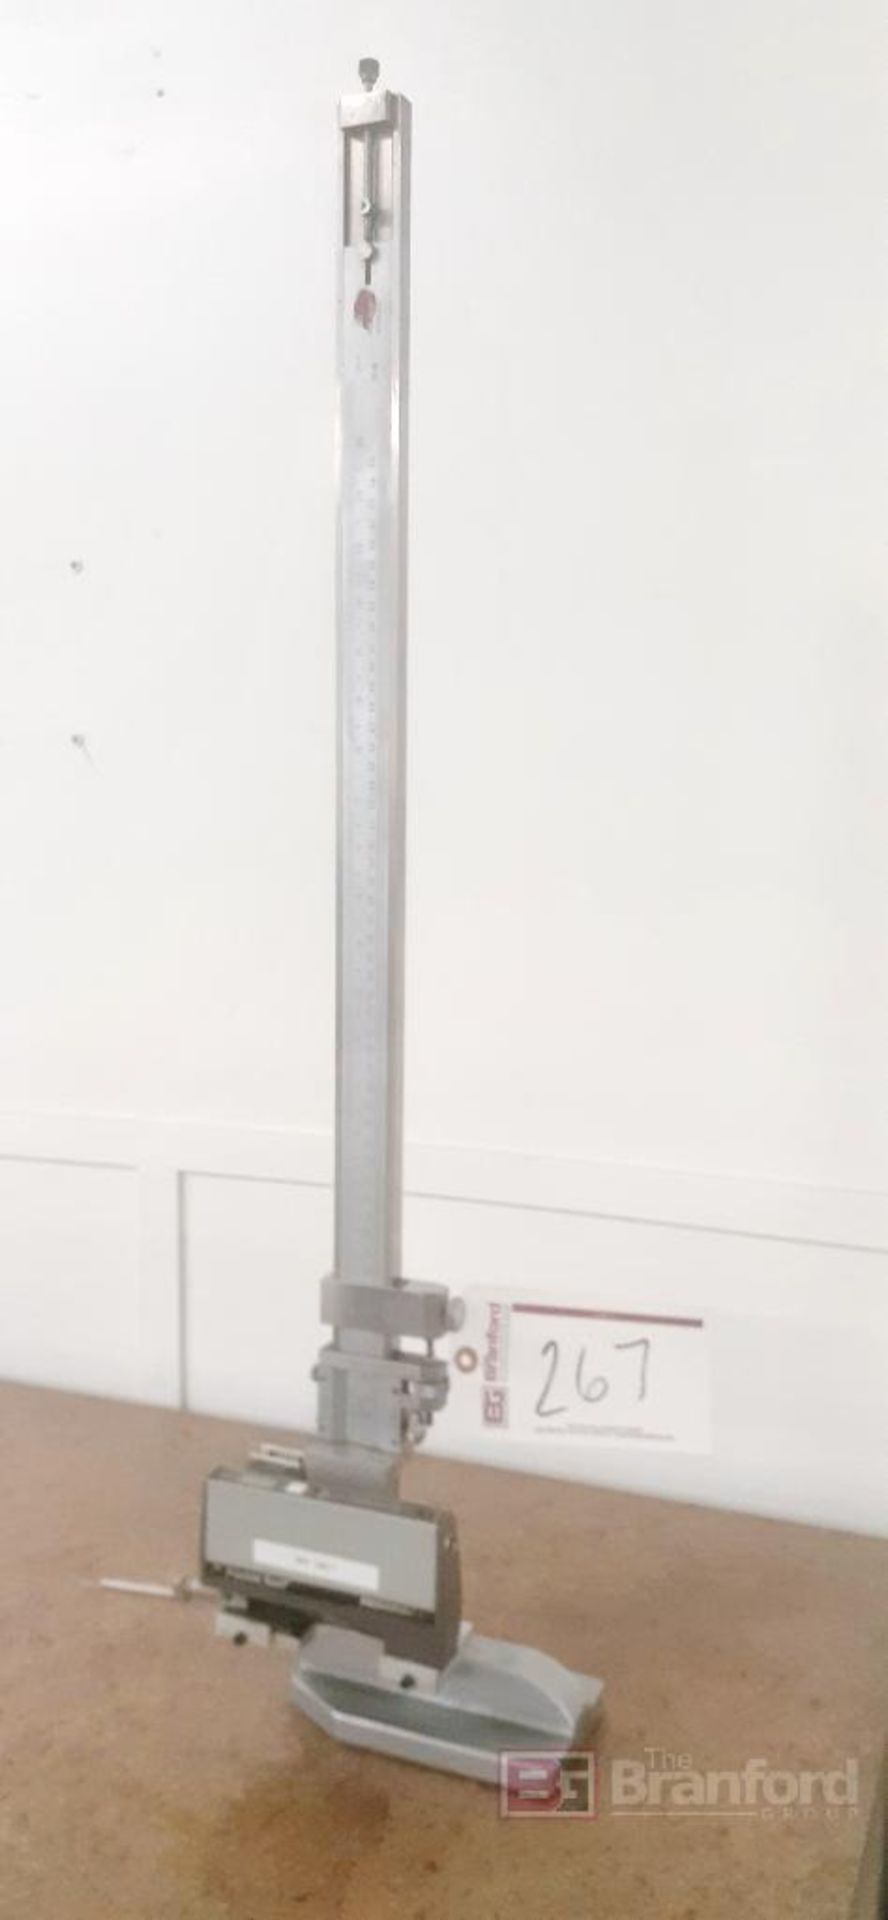 Mitutoyo 24" Height Gauge w/ Federal Pocket Surf III Roughness Tester